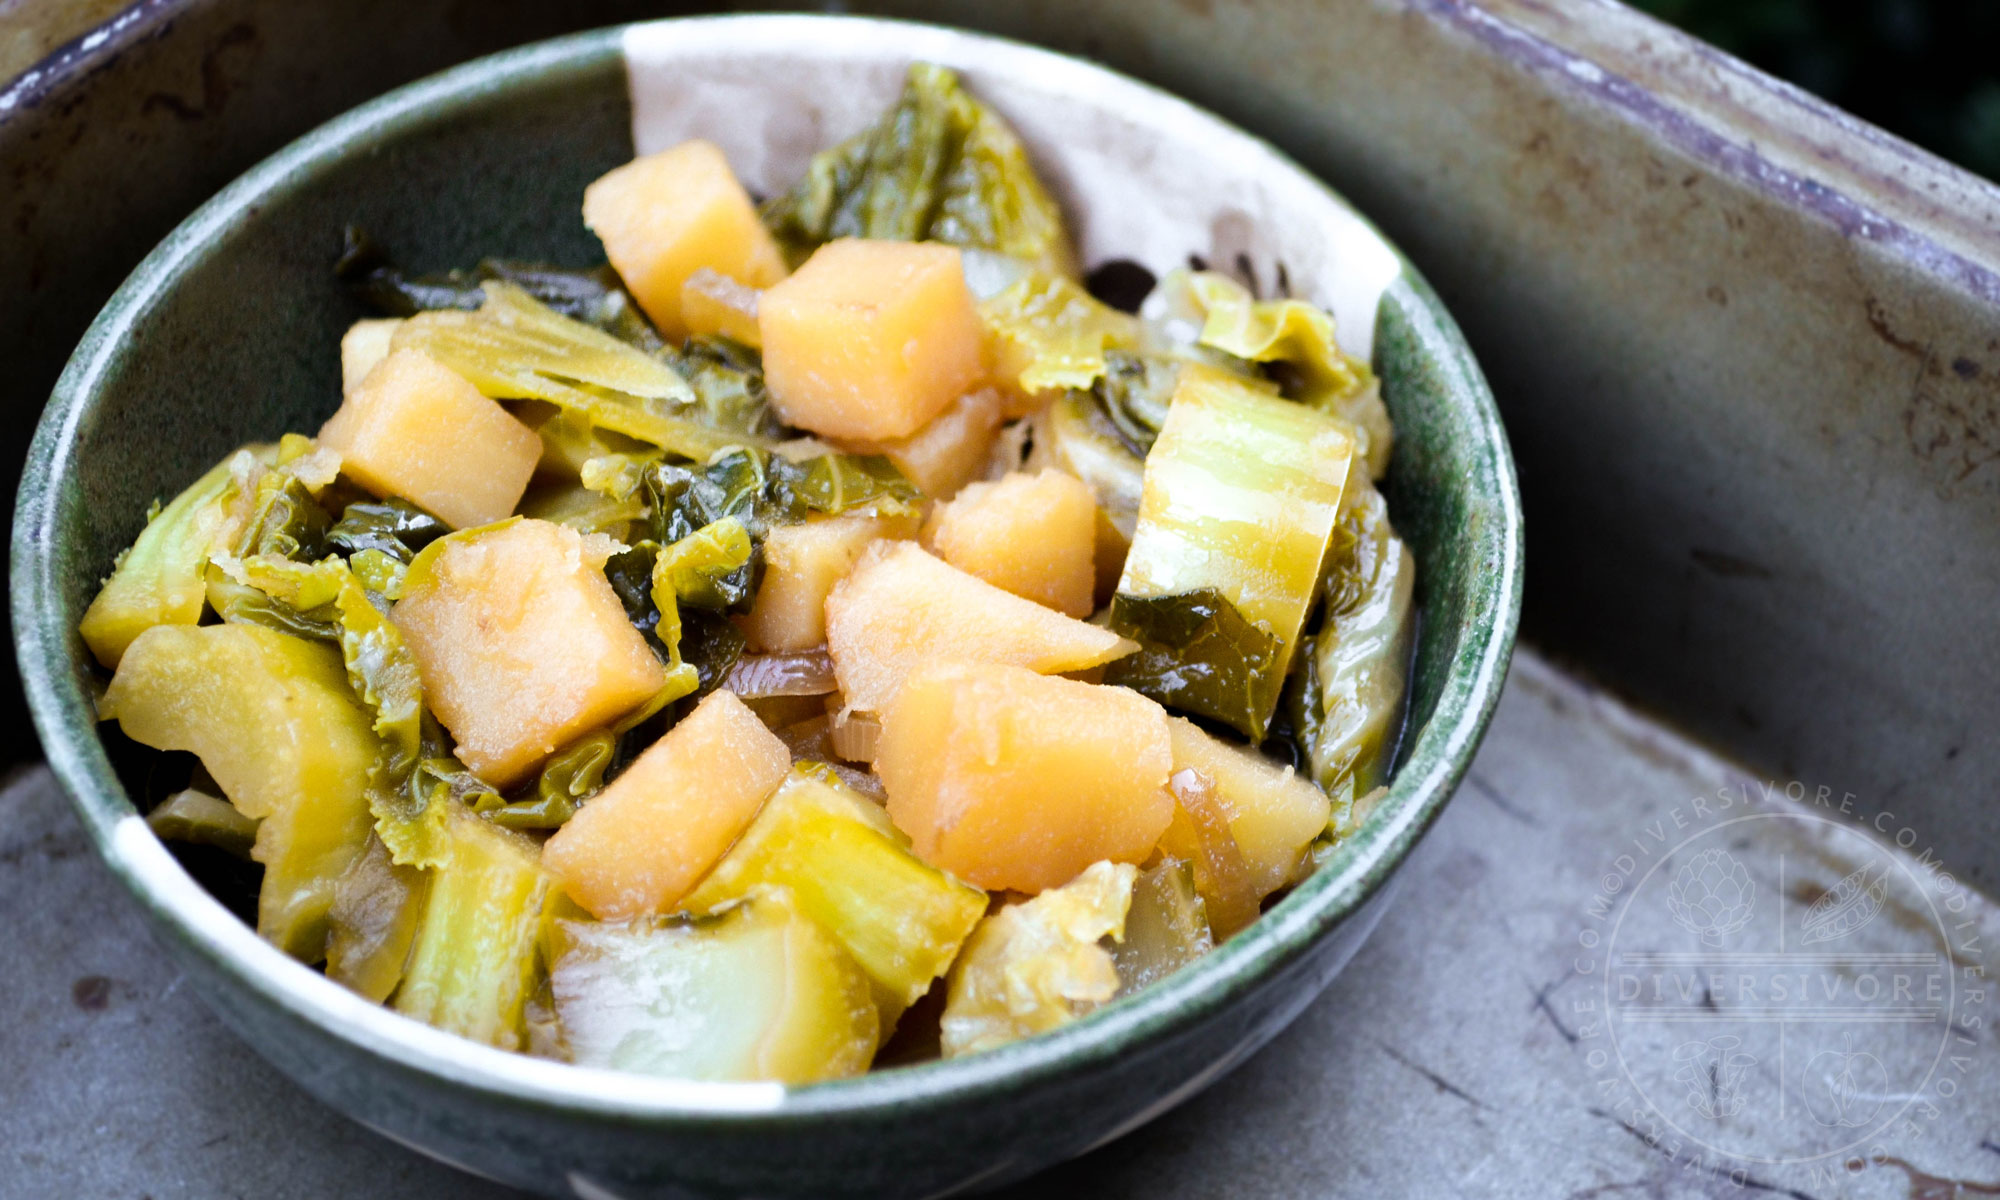 Featured image for “Japanese Simmered Cauliflower Leaves with Potatoes”